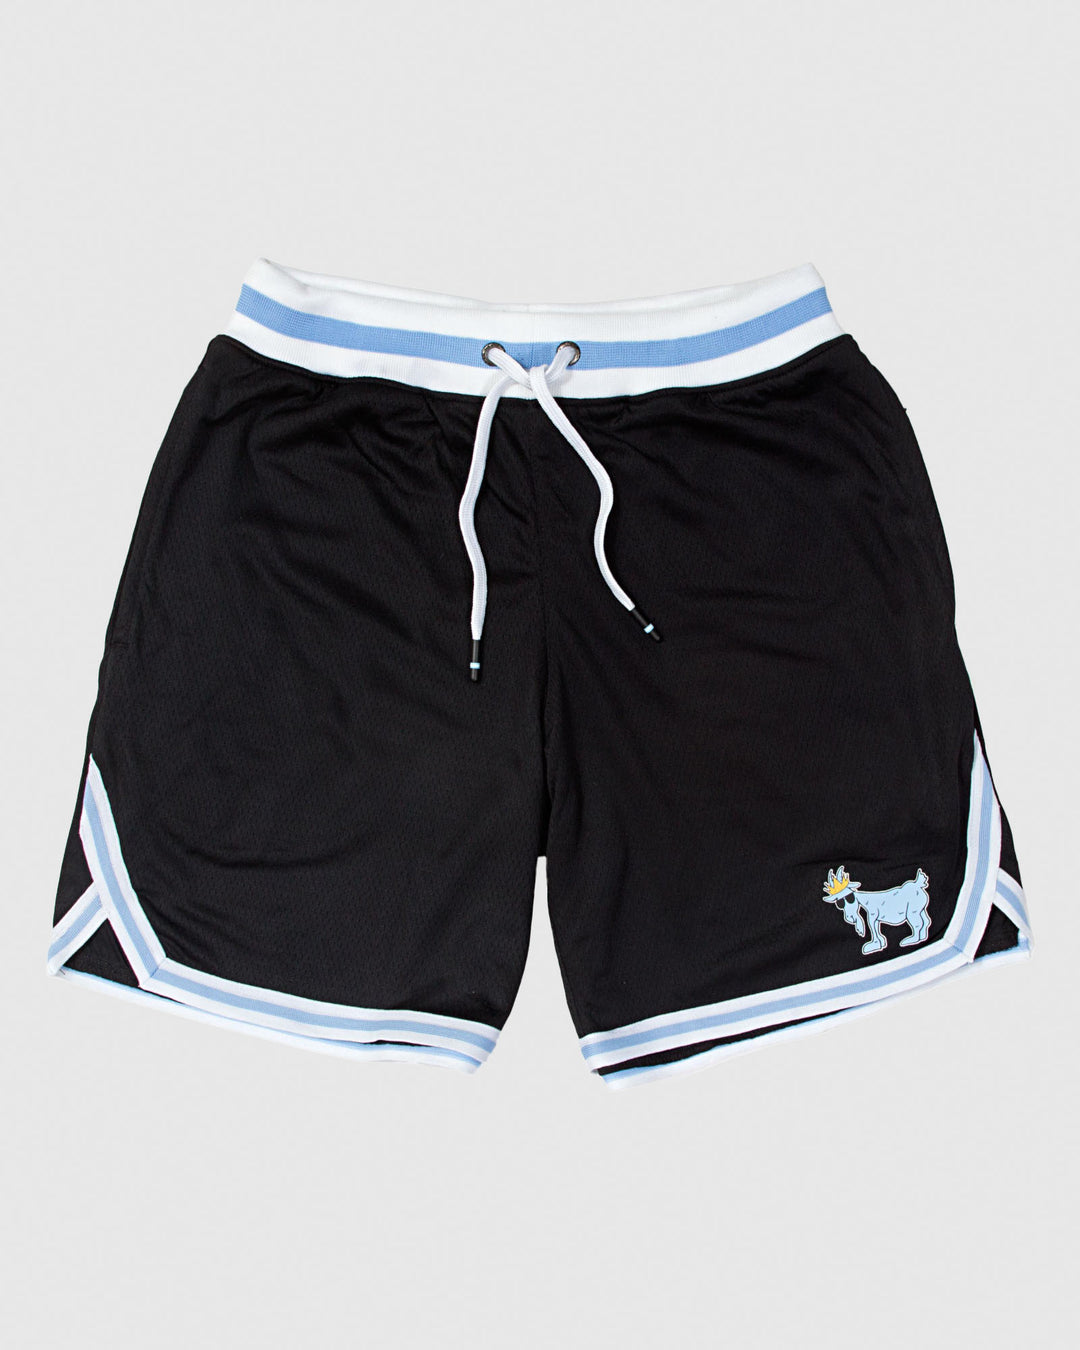 Black mesh shorts with blue and white waistband#color_black